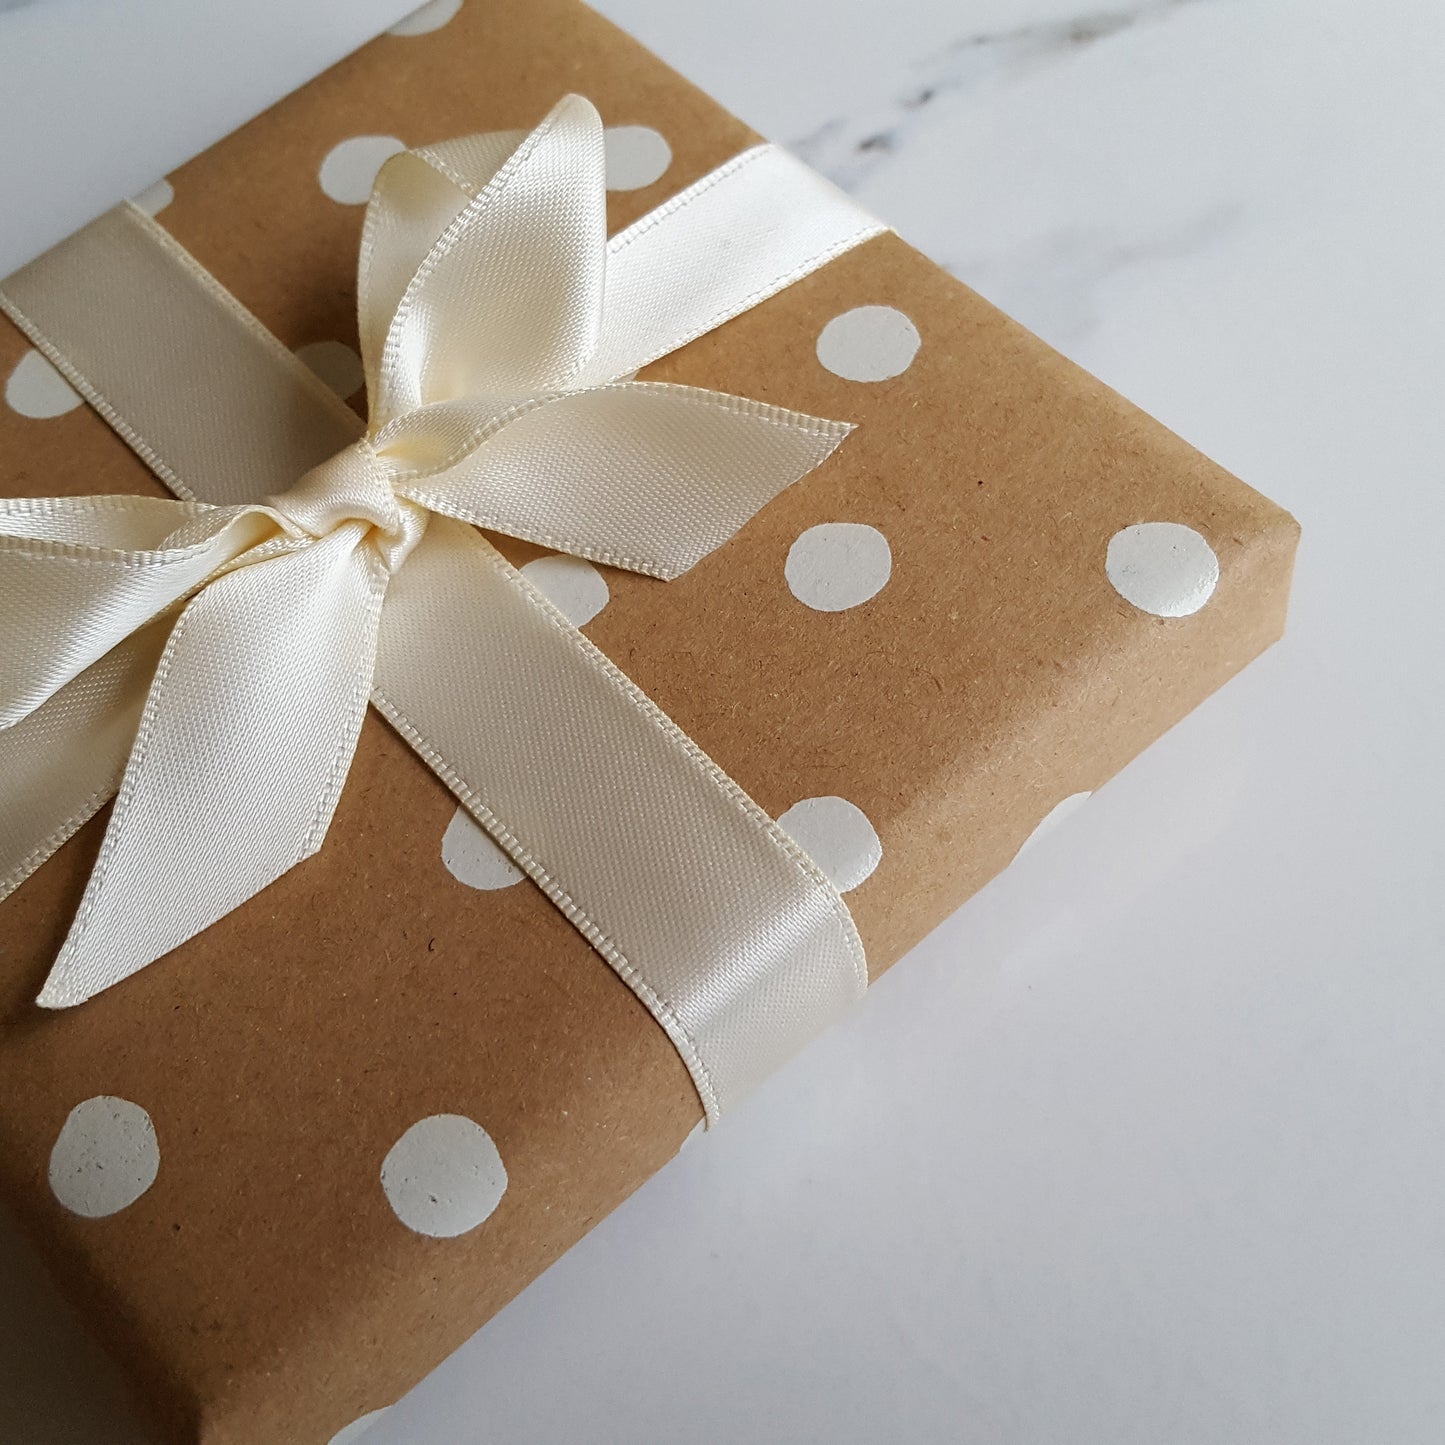 Click here to select your gift wrap